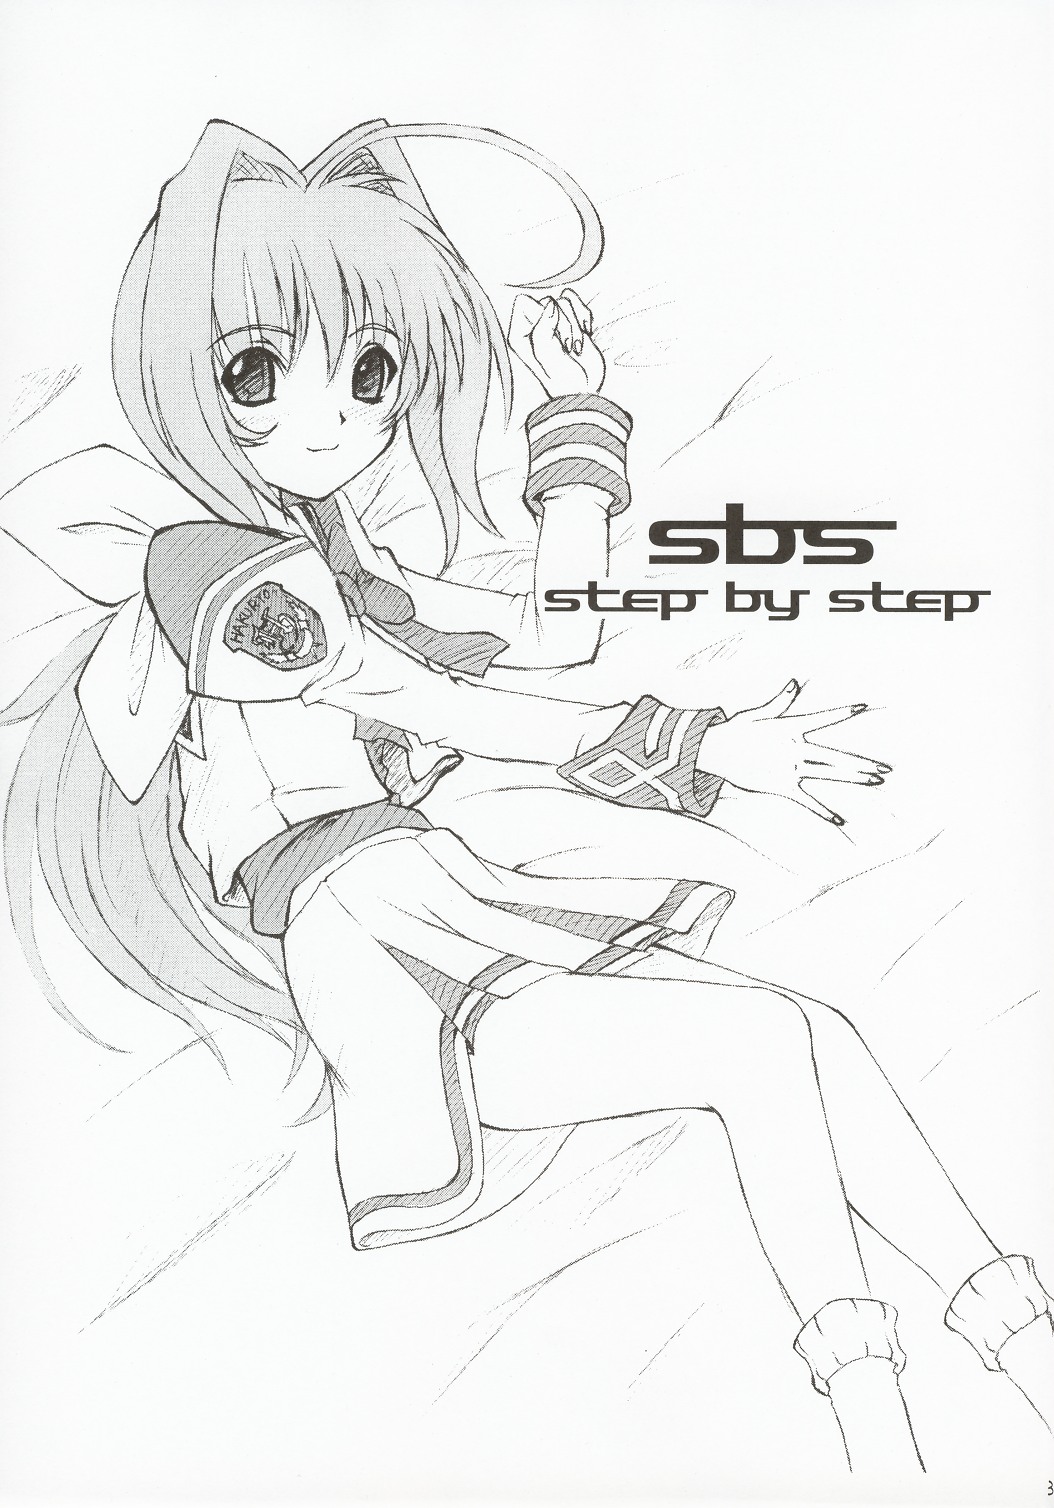 (C63) [福ぷく亭 (赤井やつか)] SBS step by step (マブラヴ)